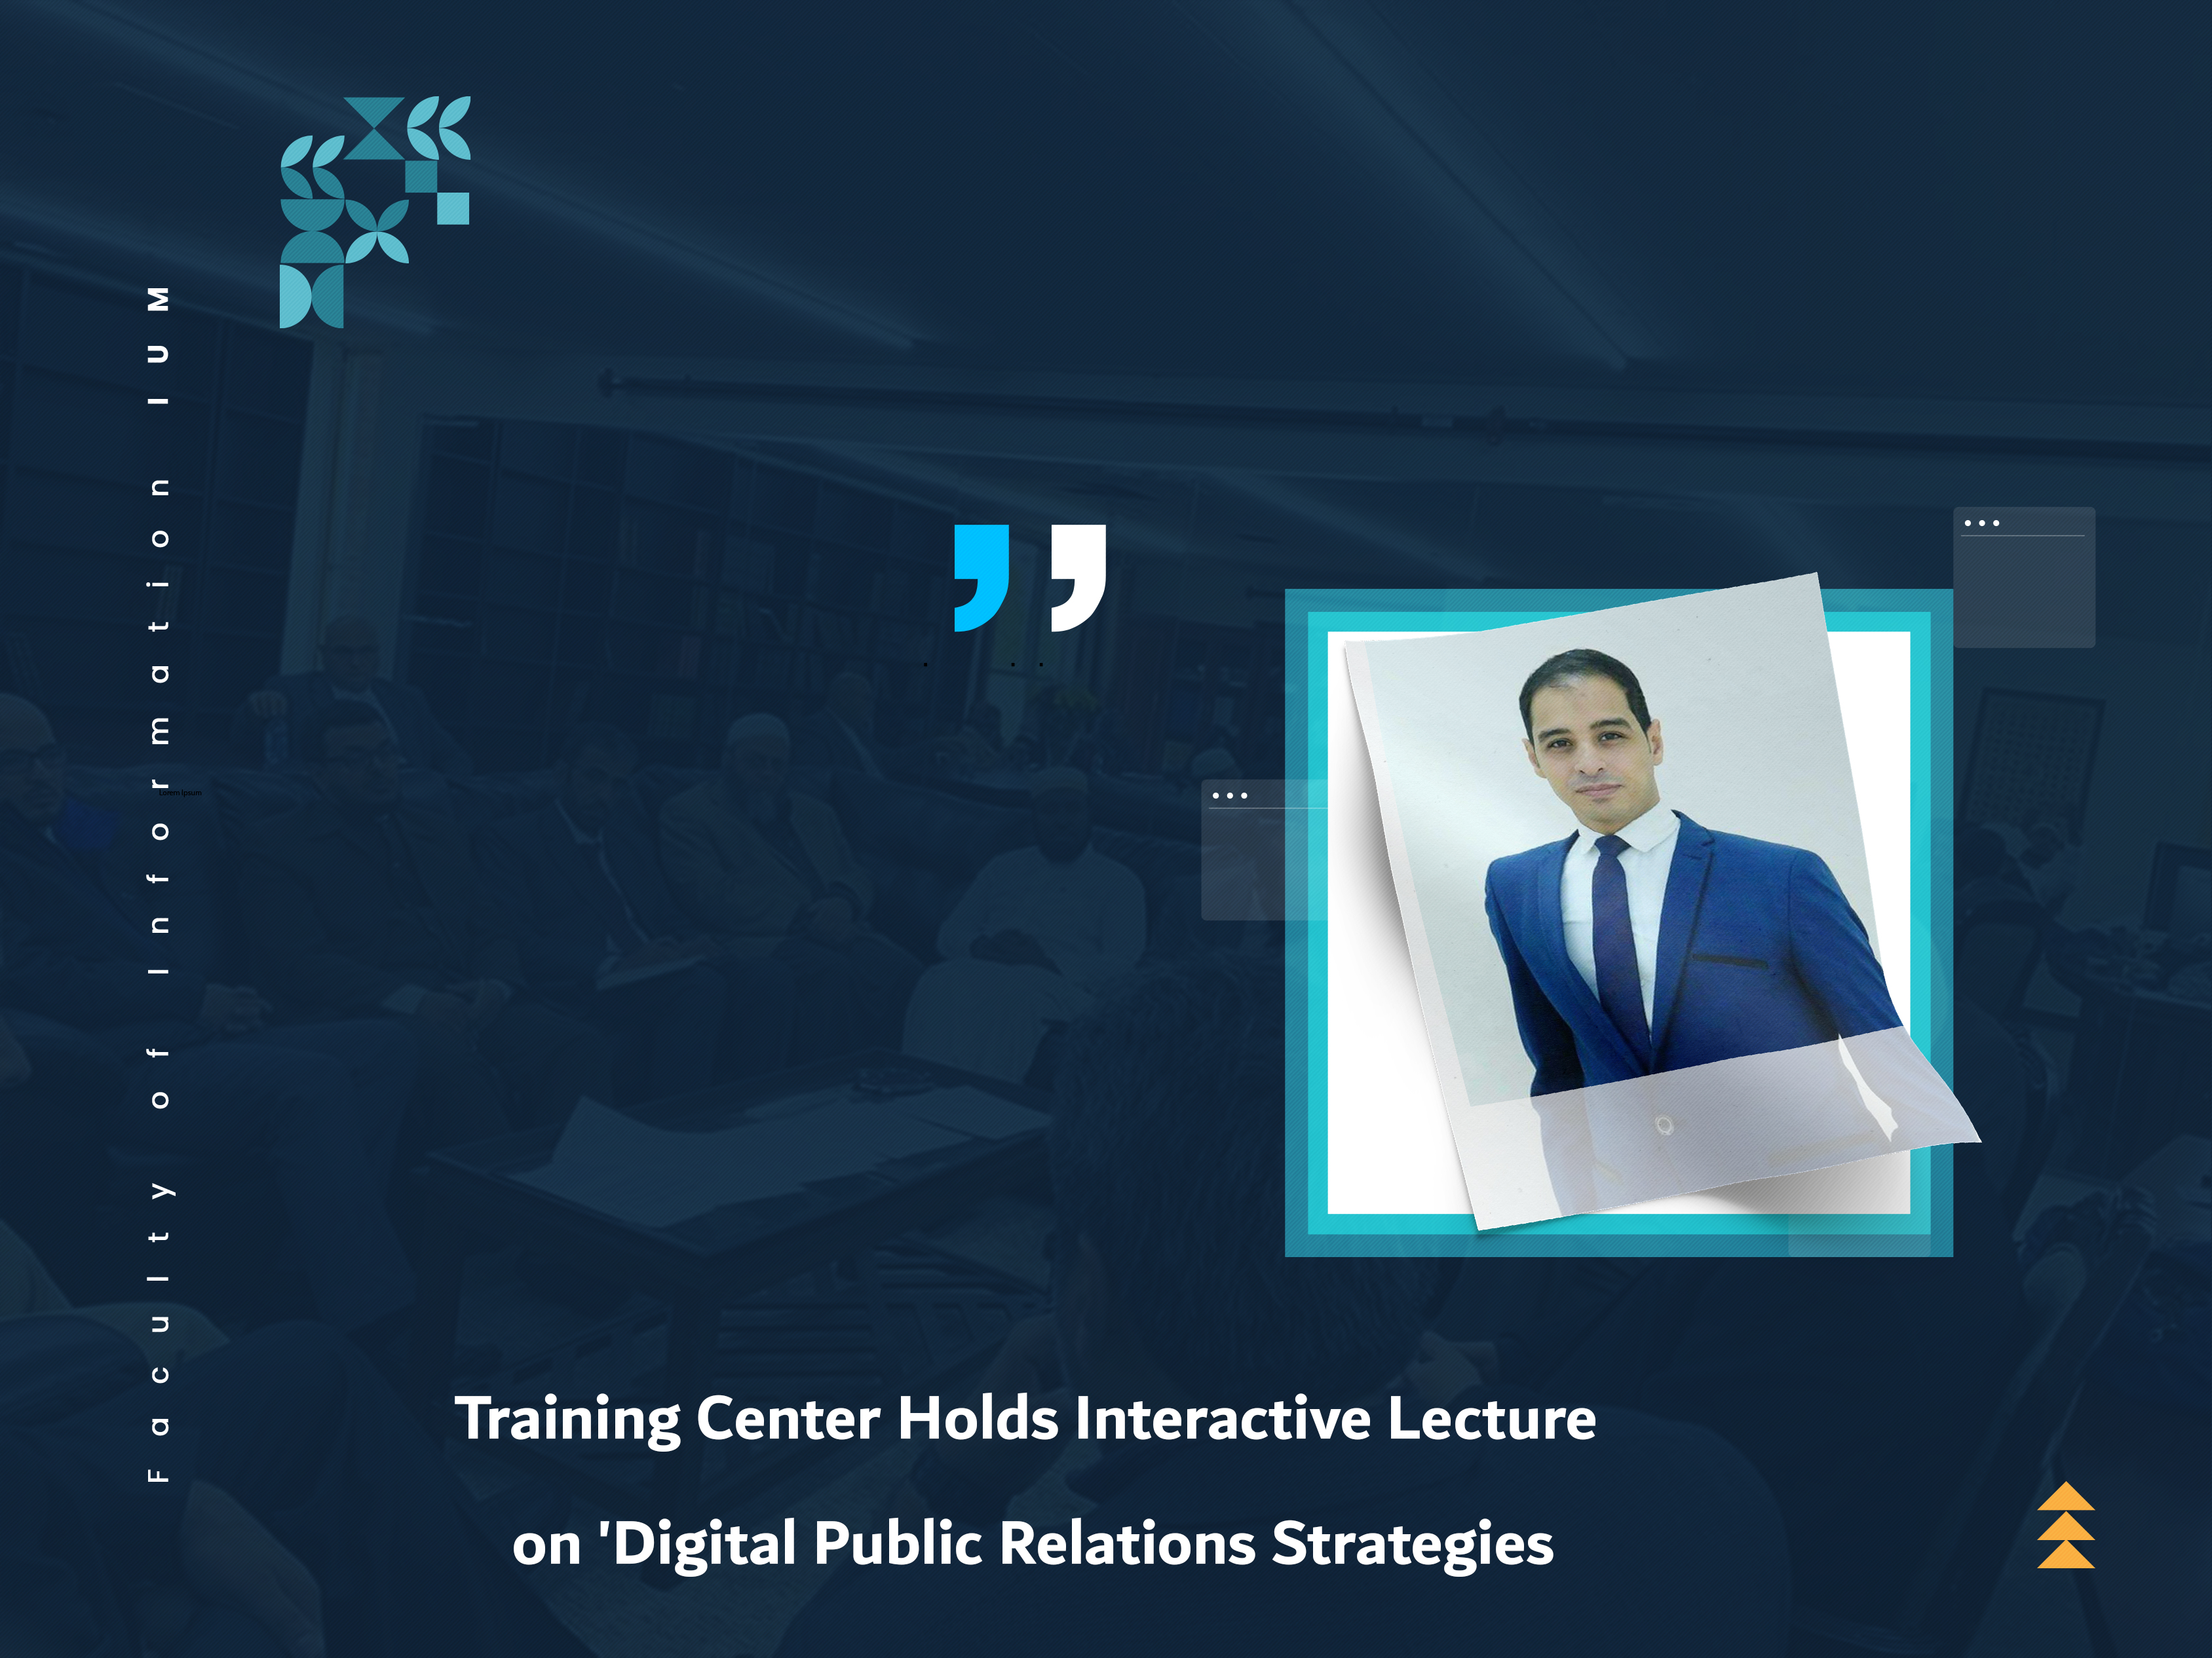 Training Center Holds Interactive Lecture on 'Digital Public Relations Strategies'